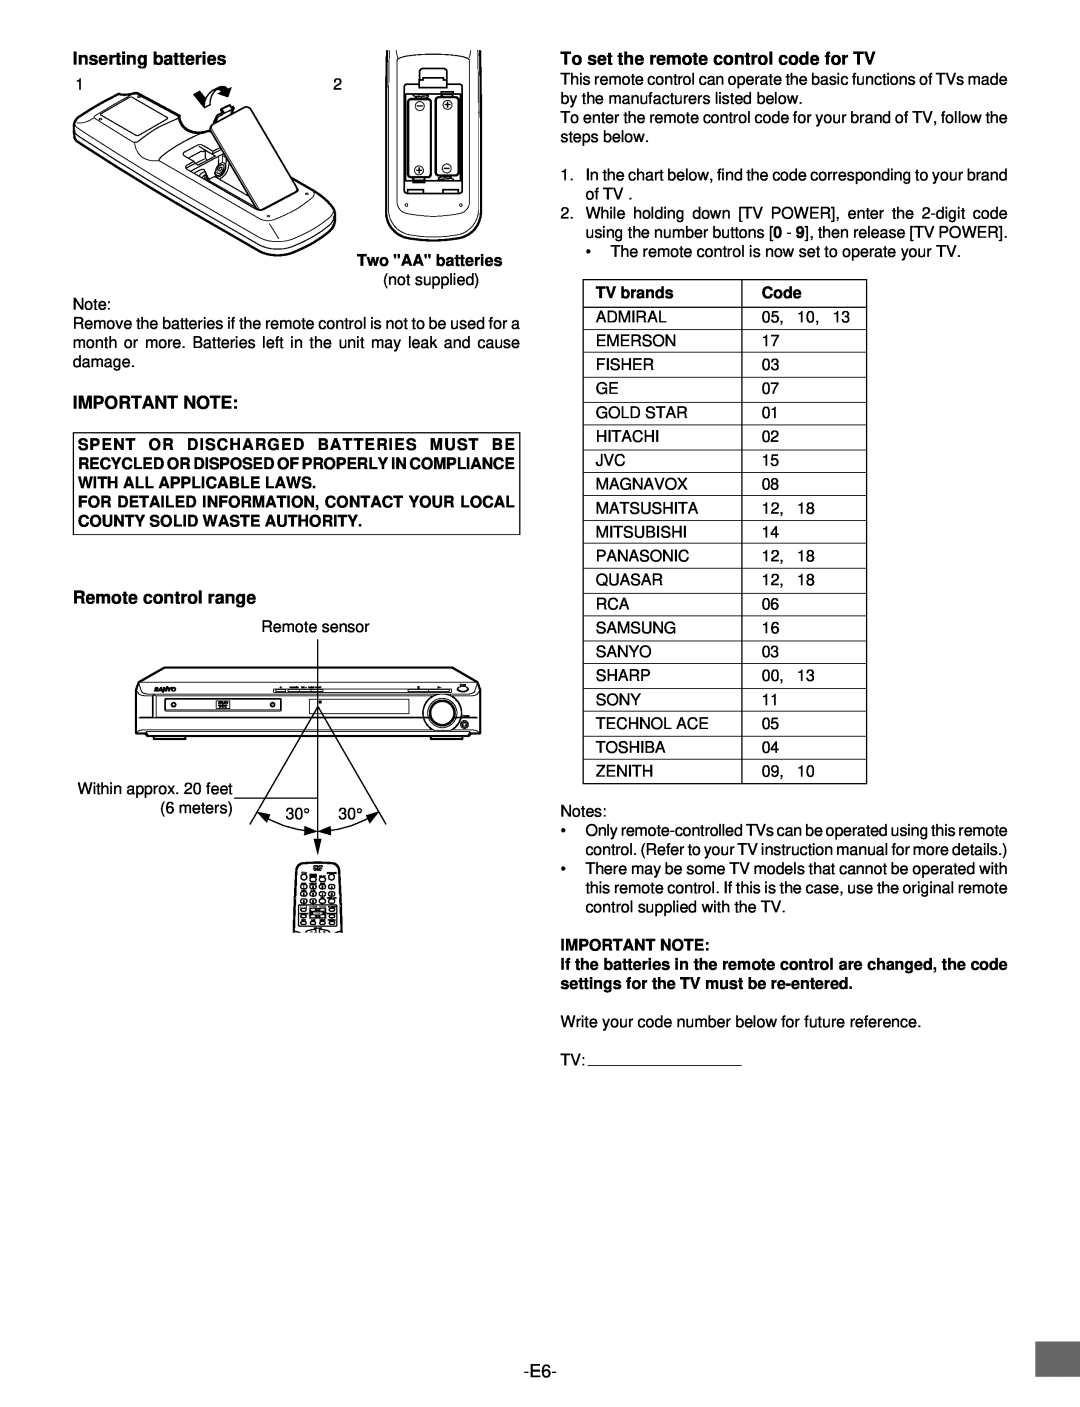 Sanyo DWM-2500 Inserting batteries, Important Note, Remote control range, To set the remote control code for TV, TV brands 